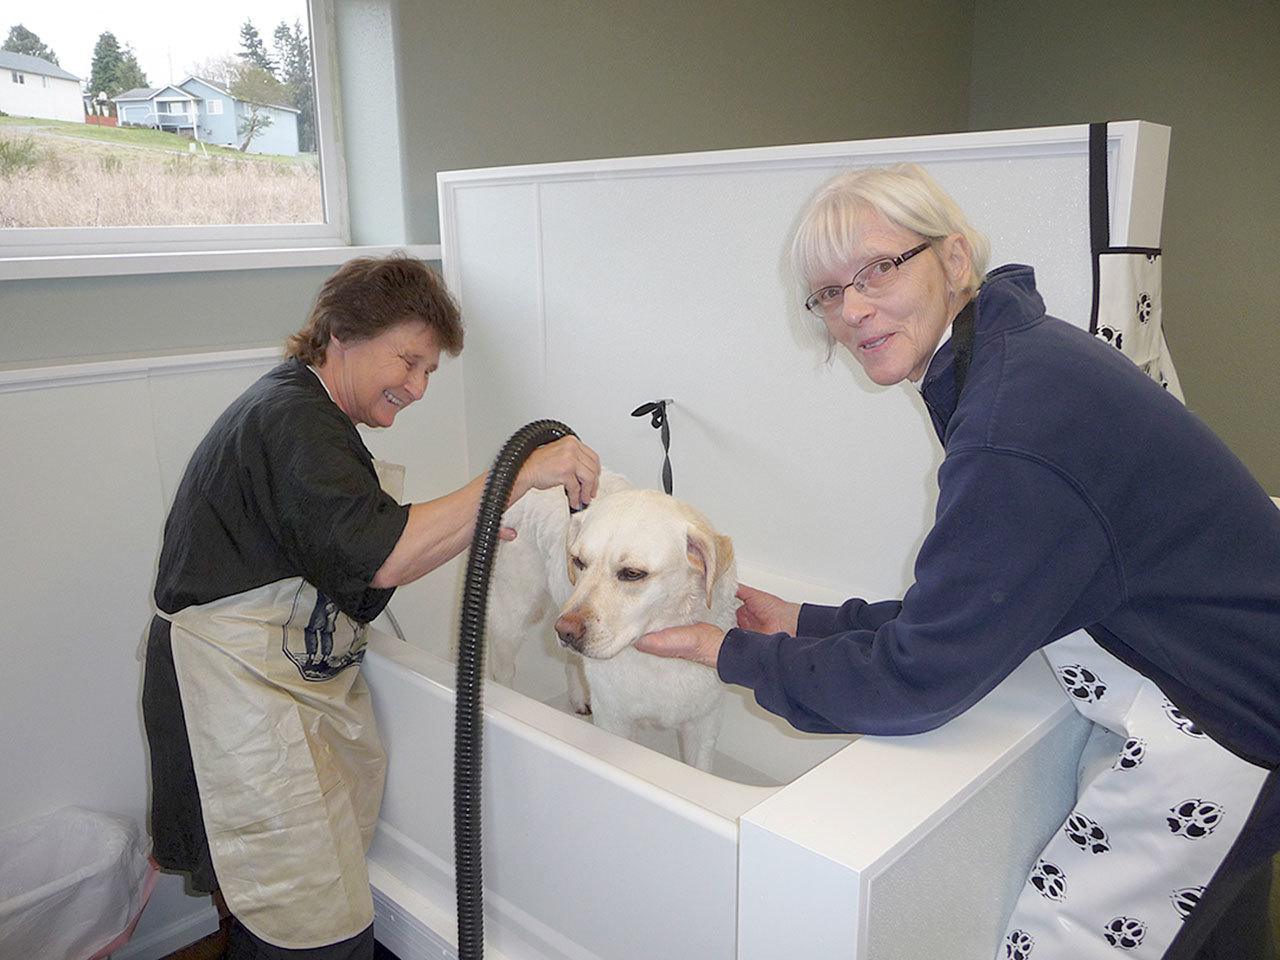 Dog Gone Groomer owner Deb Kent, left, blow dries Punkin as her owner Vicki Niederkorn assists in the self-service portion of the business. Sequim Gazette photo by Patricia Morrison Coate